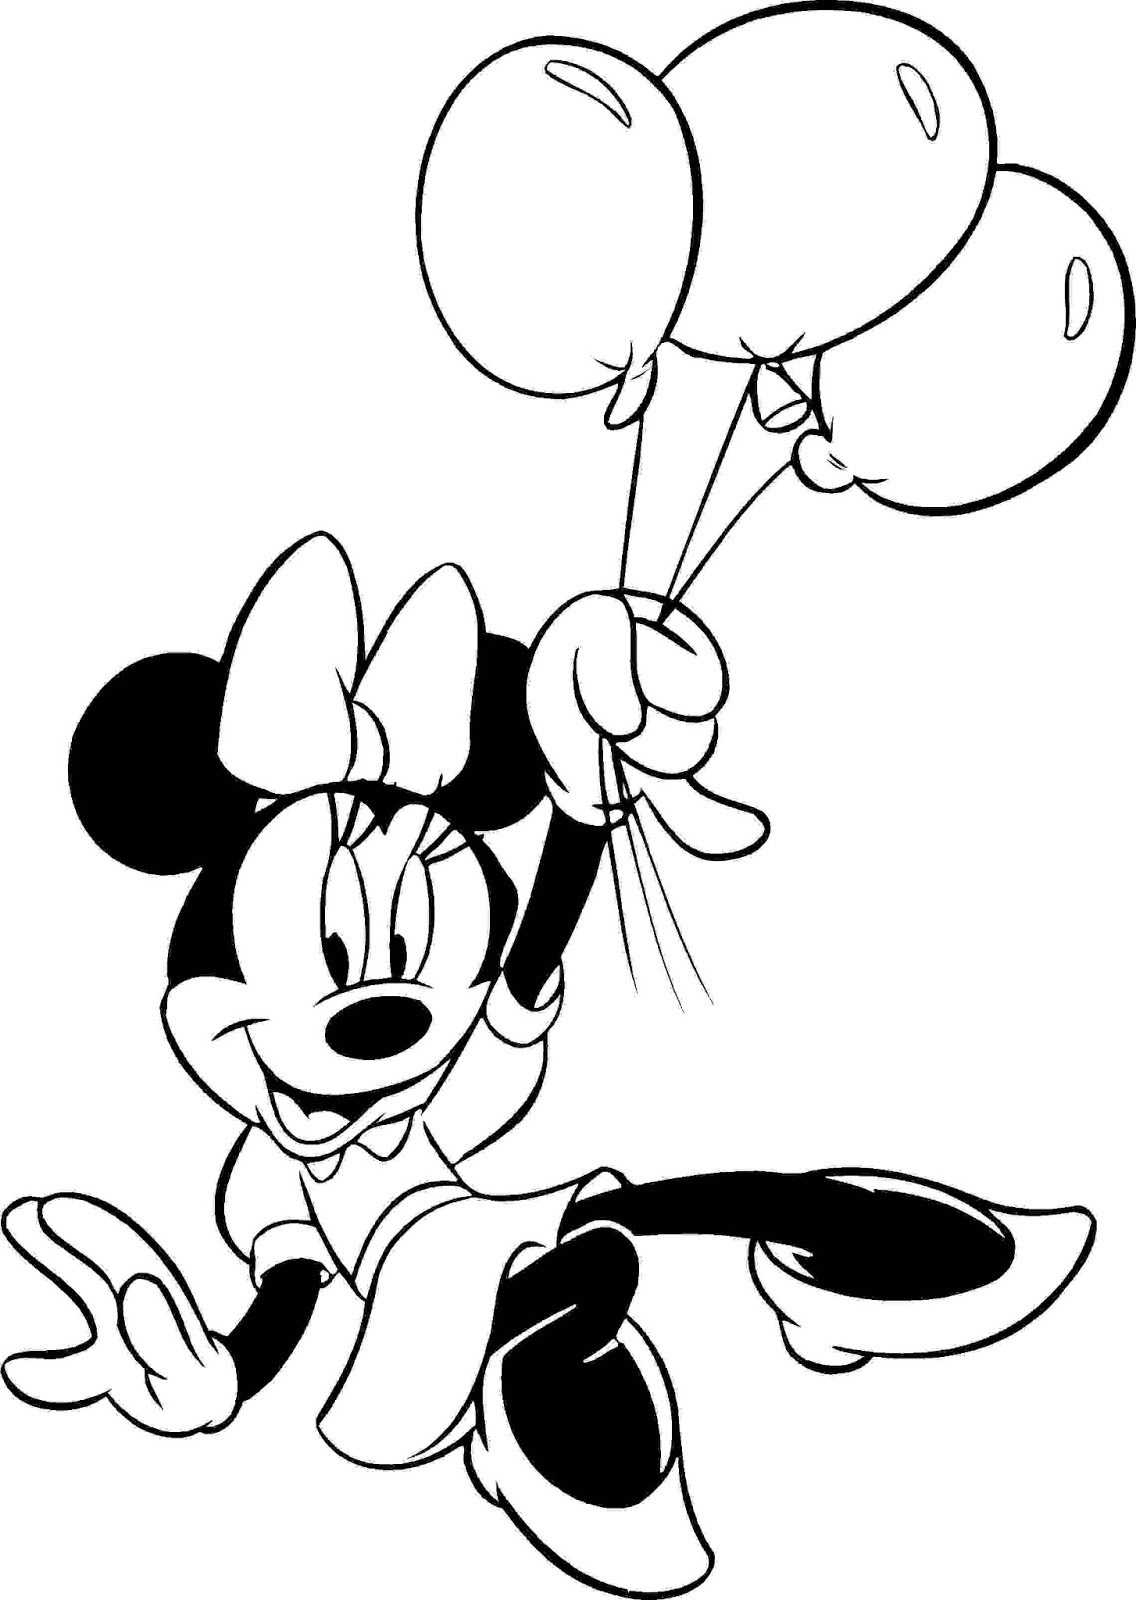 Free Coloring Pages Of Minnie Mouse
 Elegant Amzbdu Has Minnie Mouse Coloring Pages on with HD